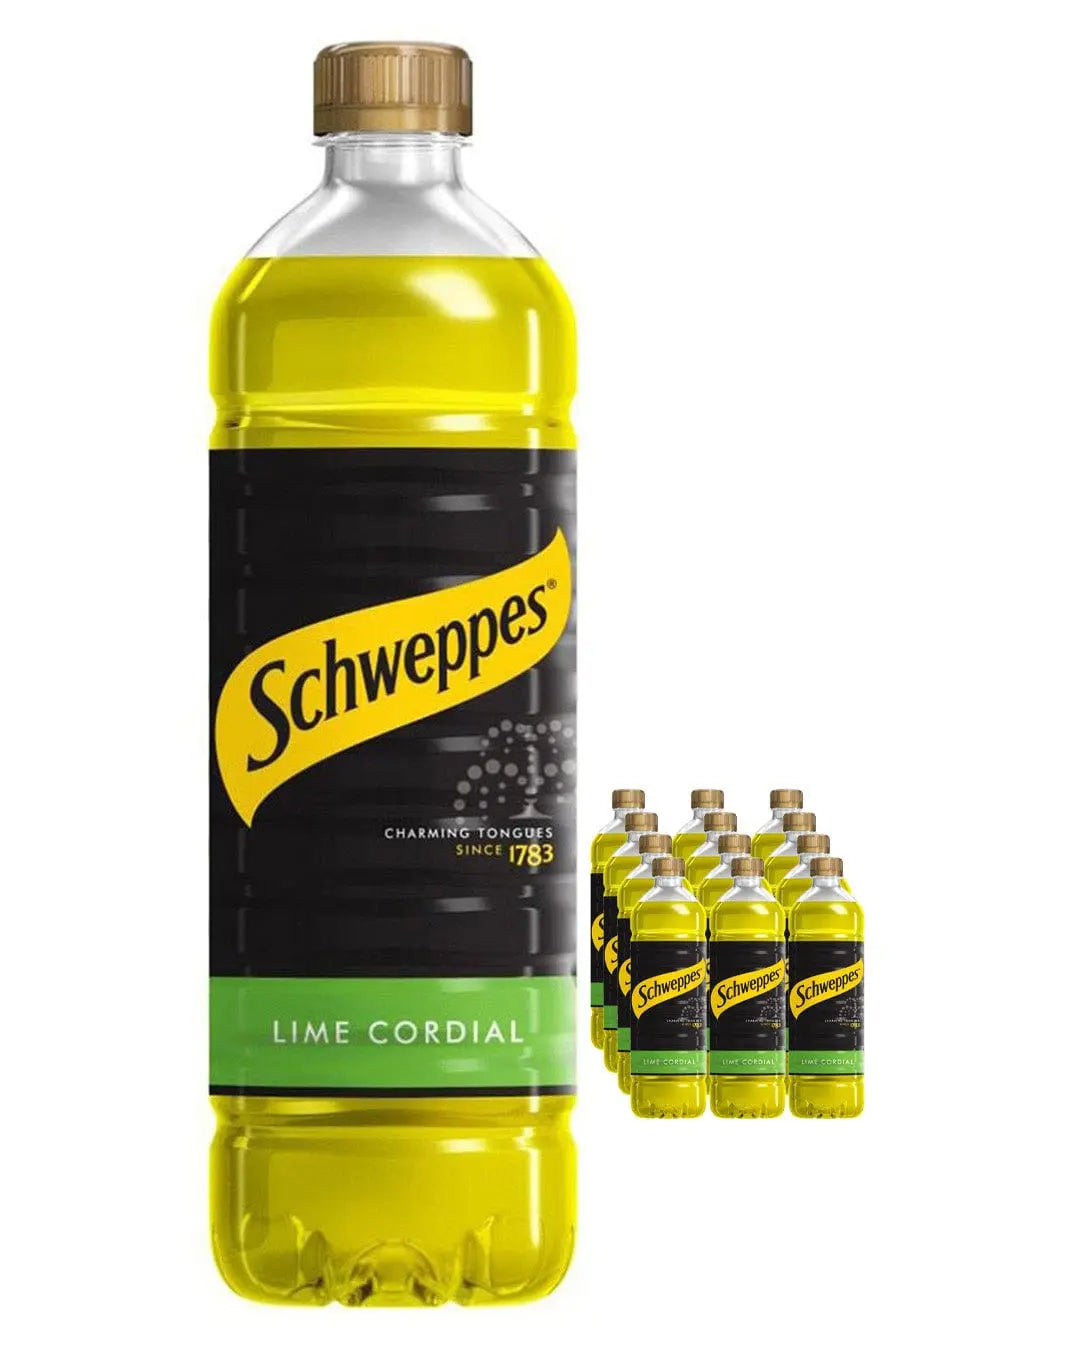 Schweppes Lime Cordial Multipack, 12 x 1 L Soft Drinks & Mixers